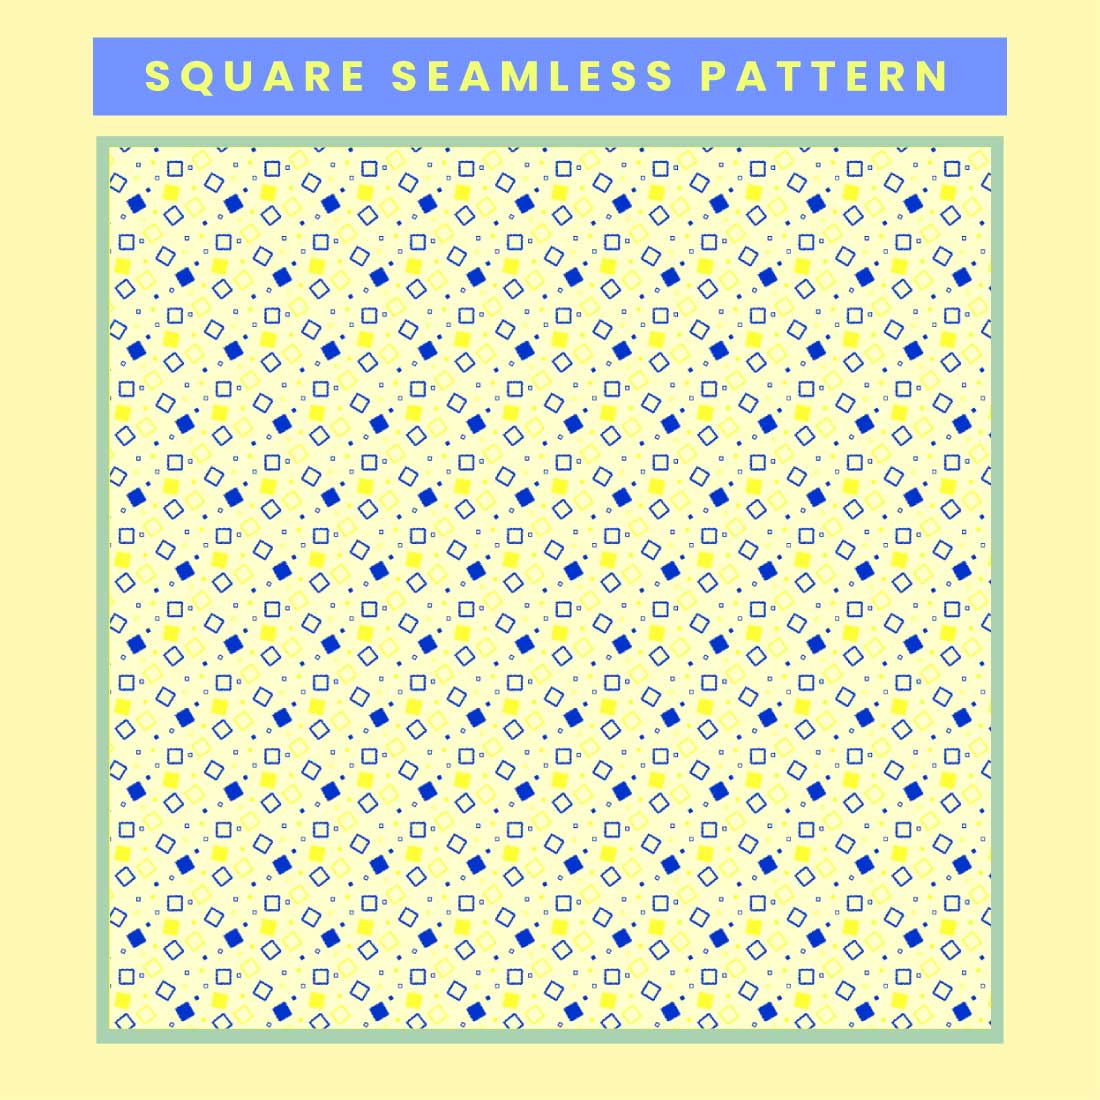 Square Seamless Pattern main cover.